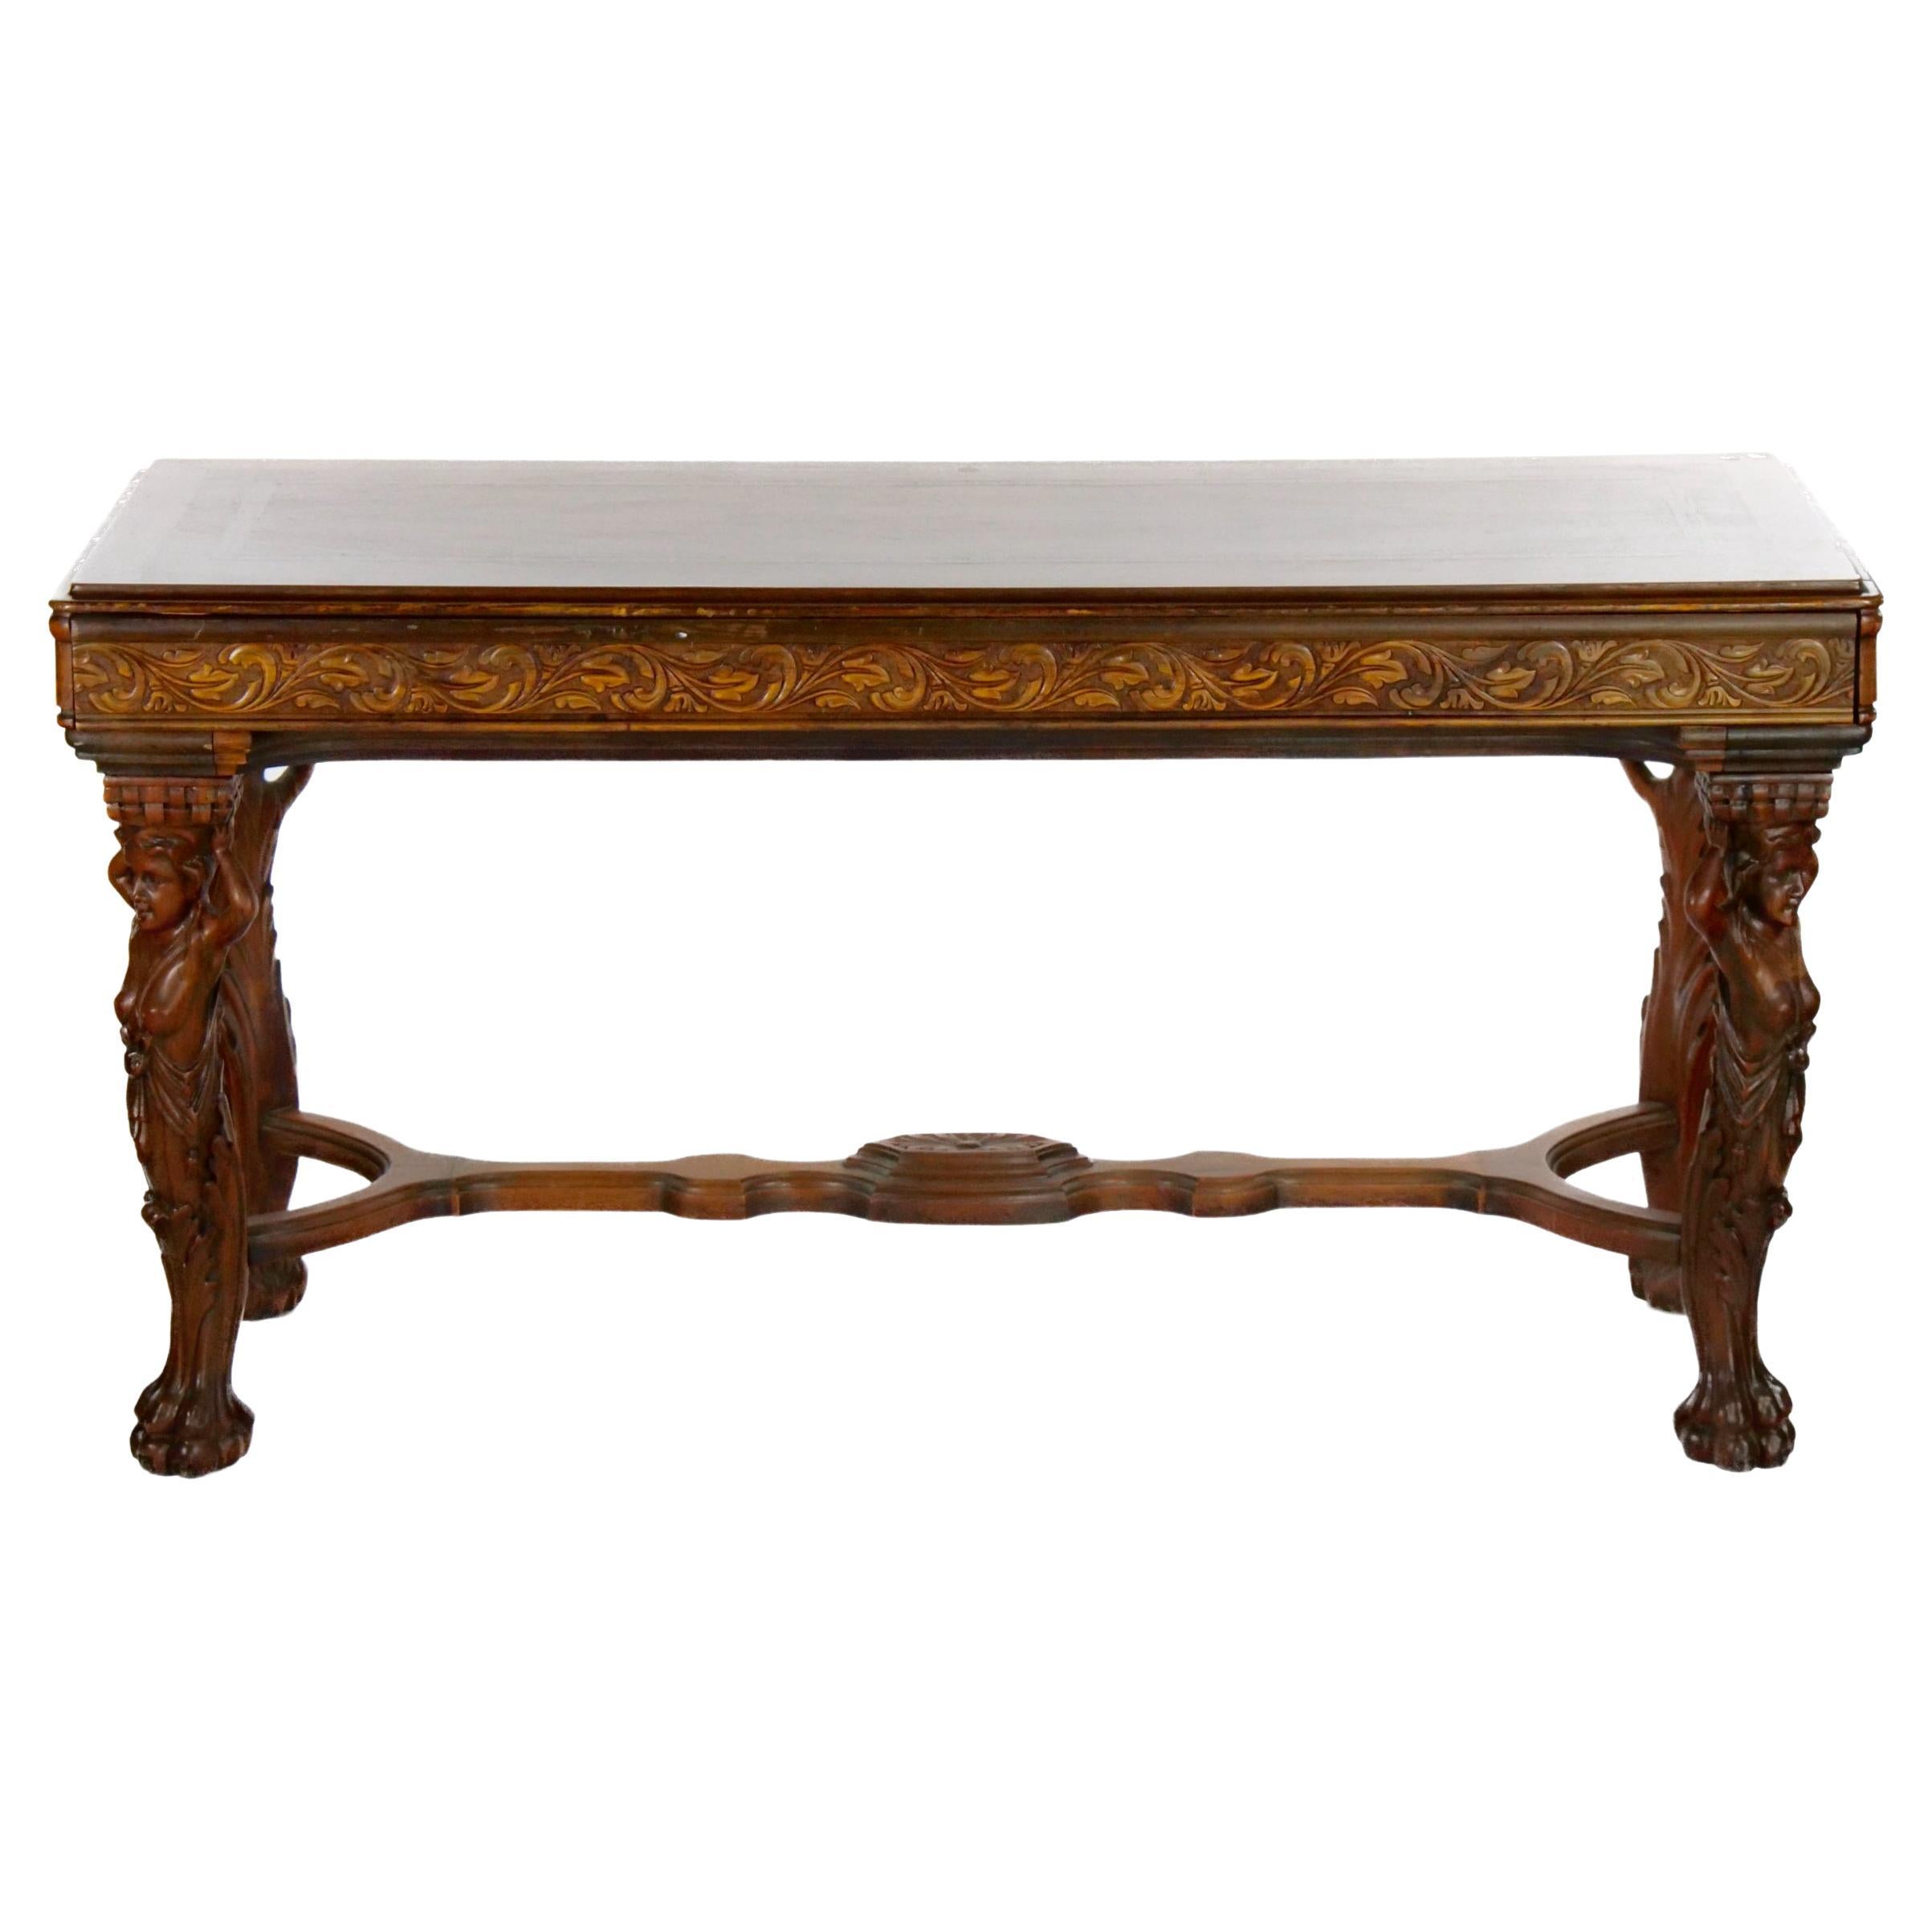 19th Century Heavily Hand Carved Inlaid Top Console / Center Table For Sale